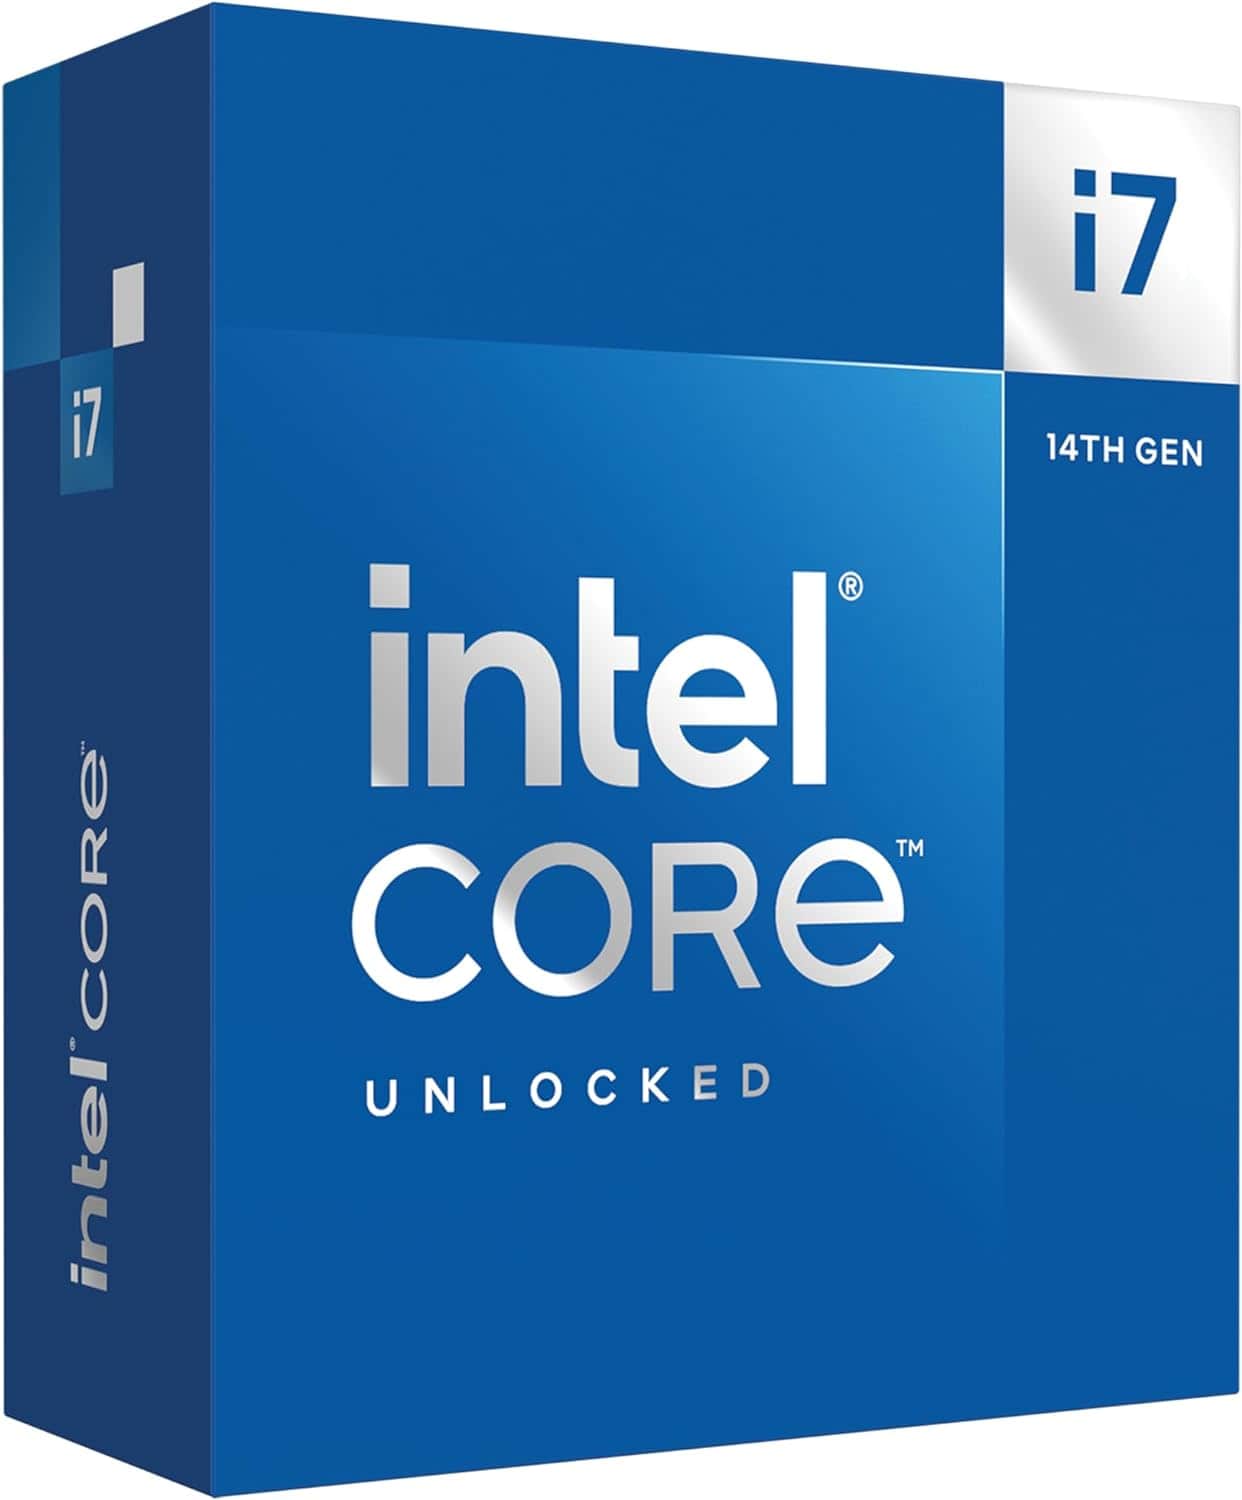 Intel core i7 unlocked box, perfect for auto drafting tasks with speed and efficiency.